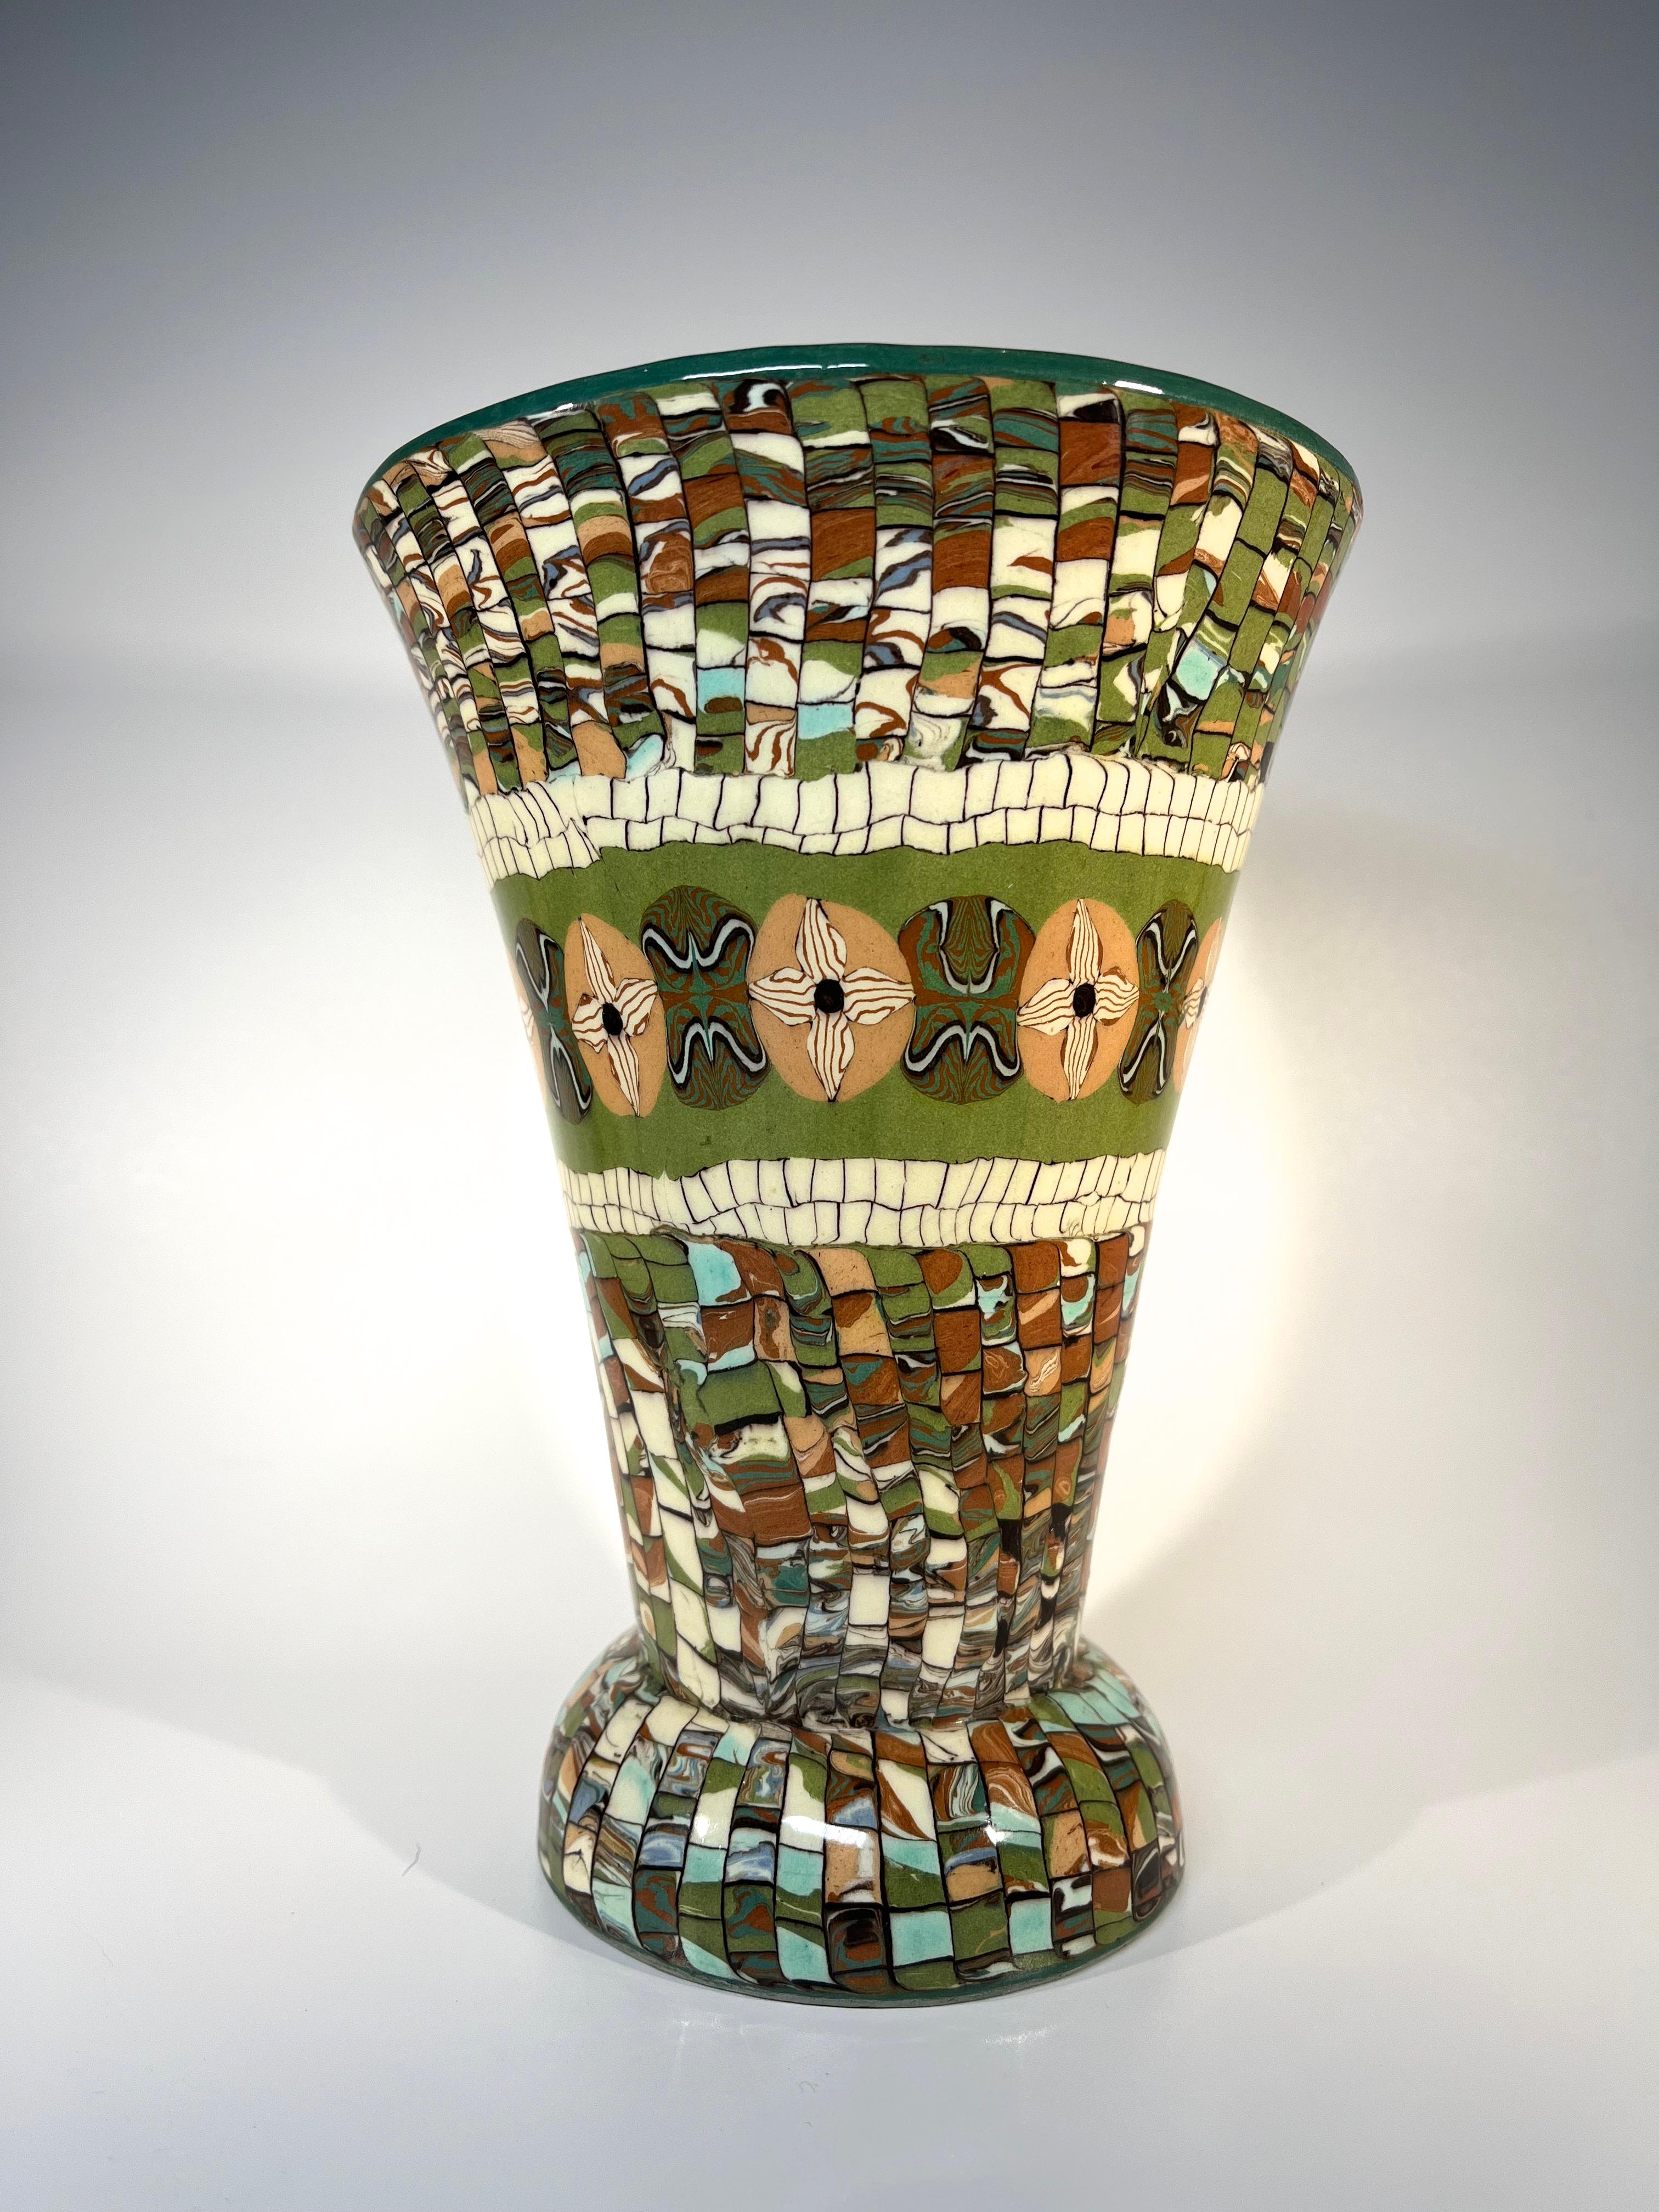 Marvellous Mosaic Ceramic Vase By Jean Gerbino For Vallauris, France In Excellent Condition For Sale In Rothley, Leicestershire